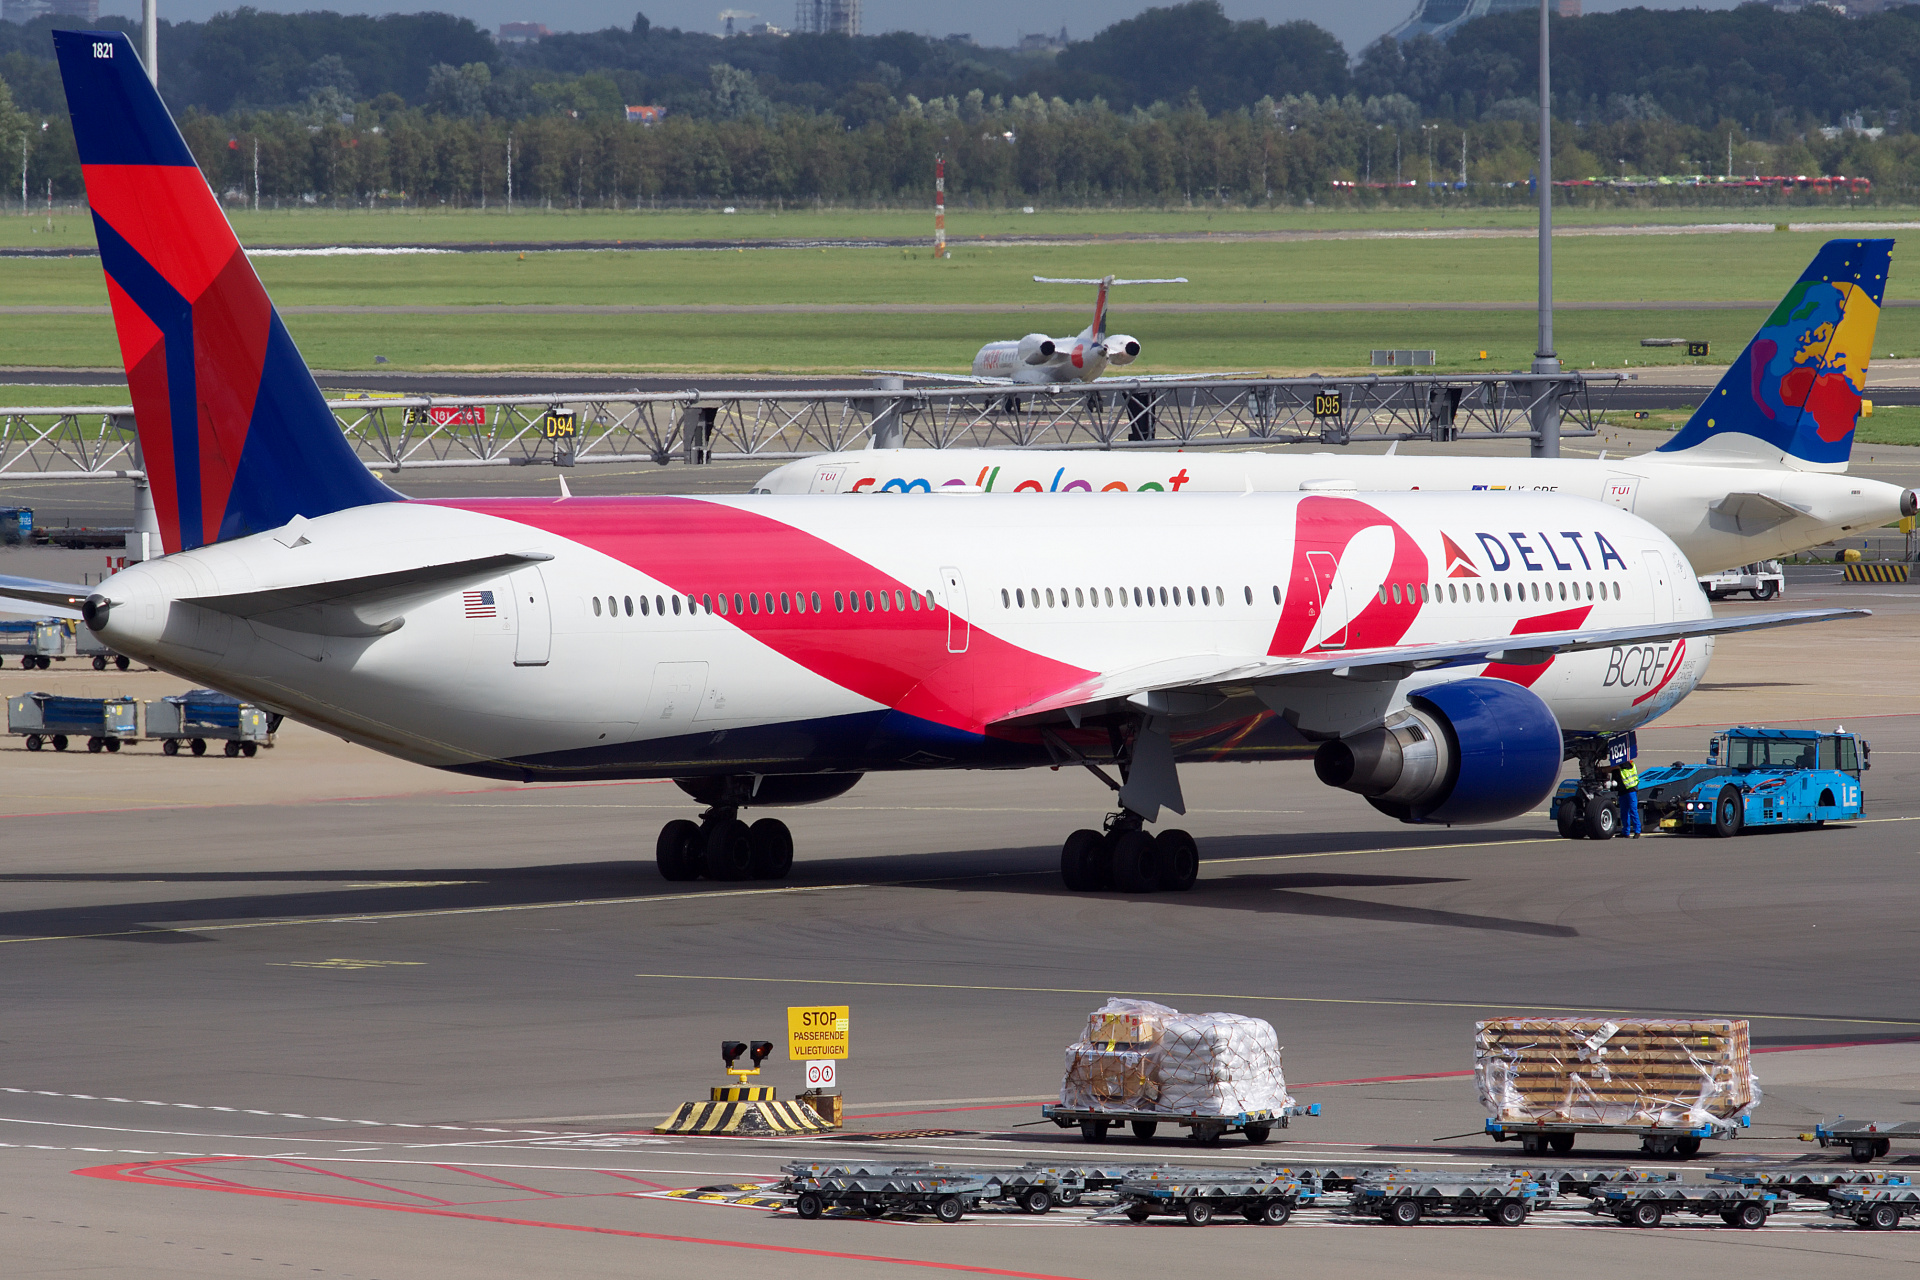 N845MH, Delta Airlines (Breast Cancer Research Foundation livery) (Aircraft » Schiphol Spotting » Boeing 767-400)